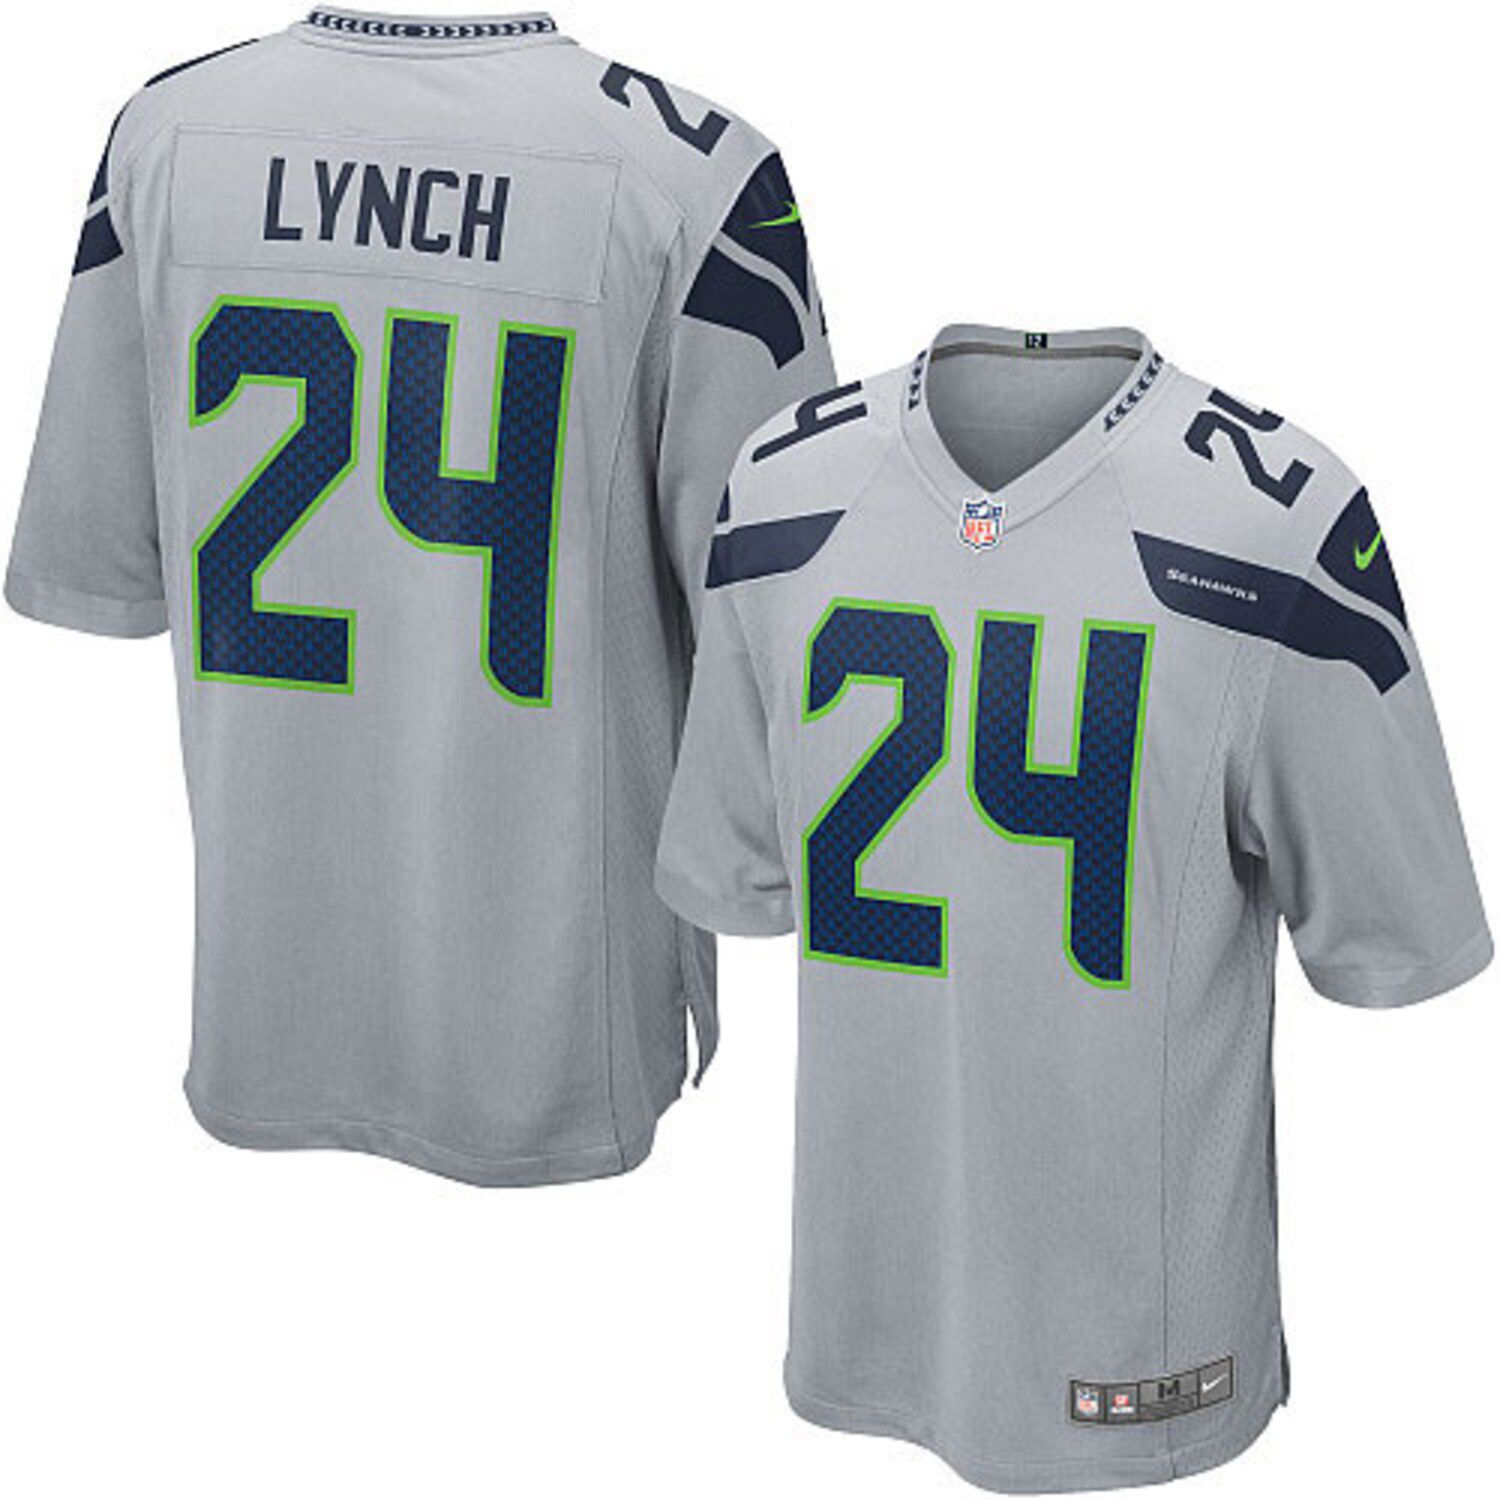 marshawn lynch official jersey